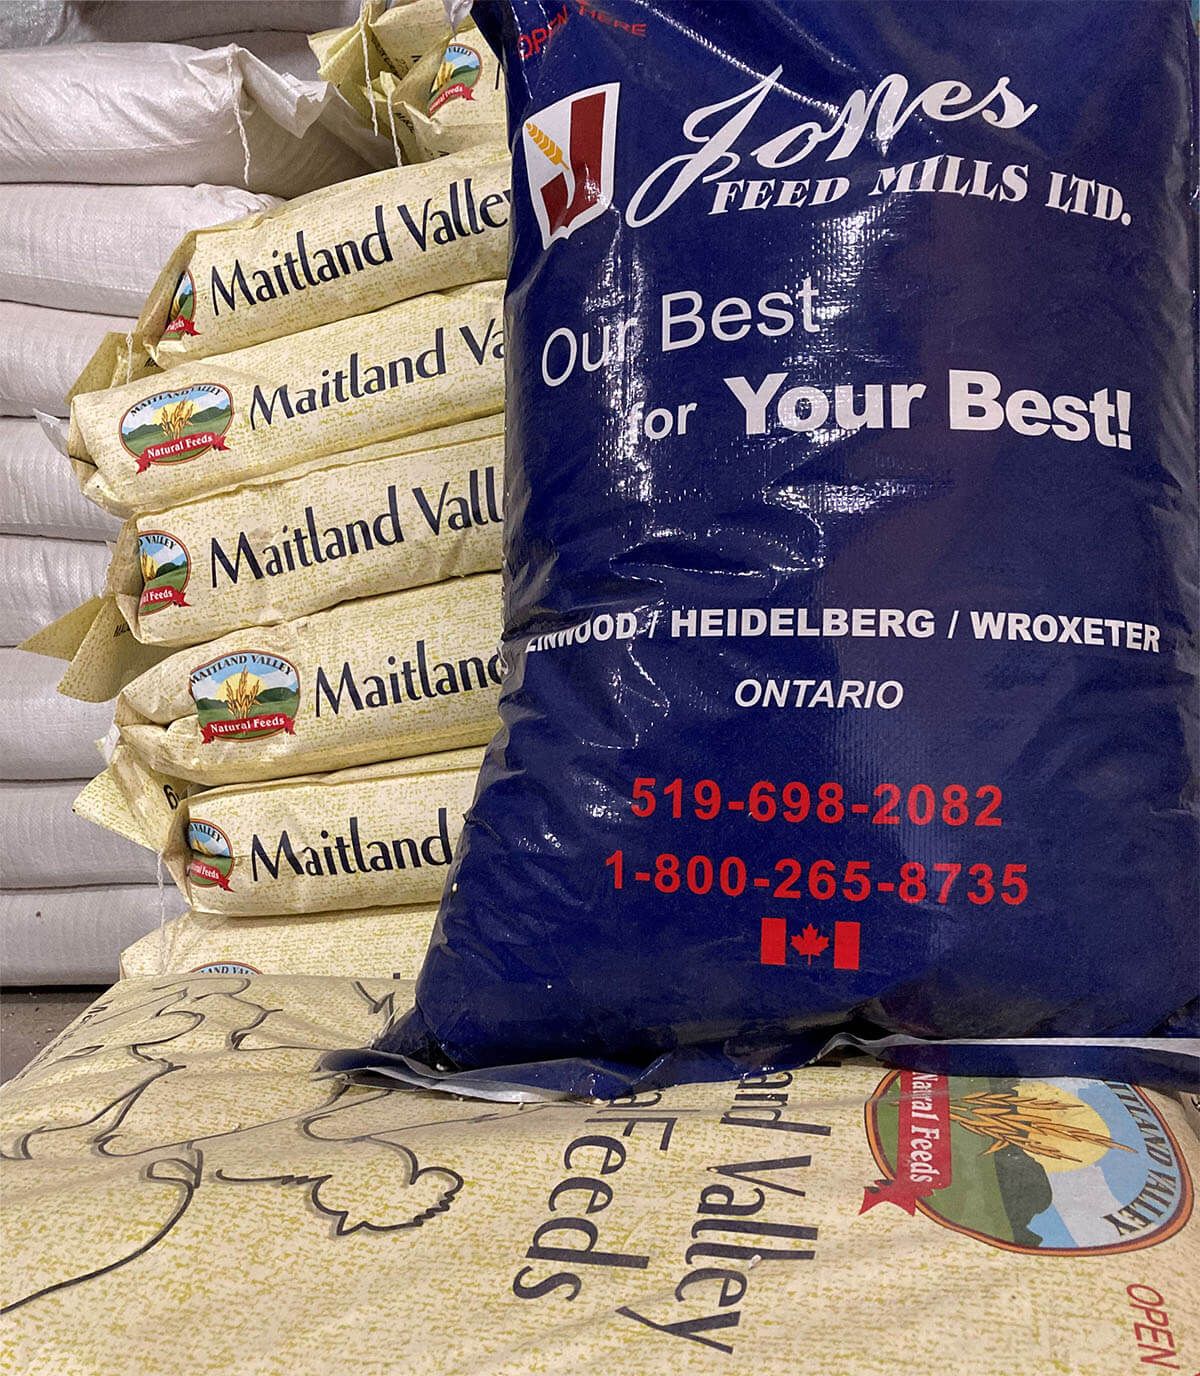 Jones Feed Mill products